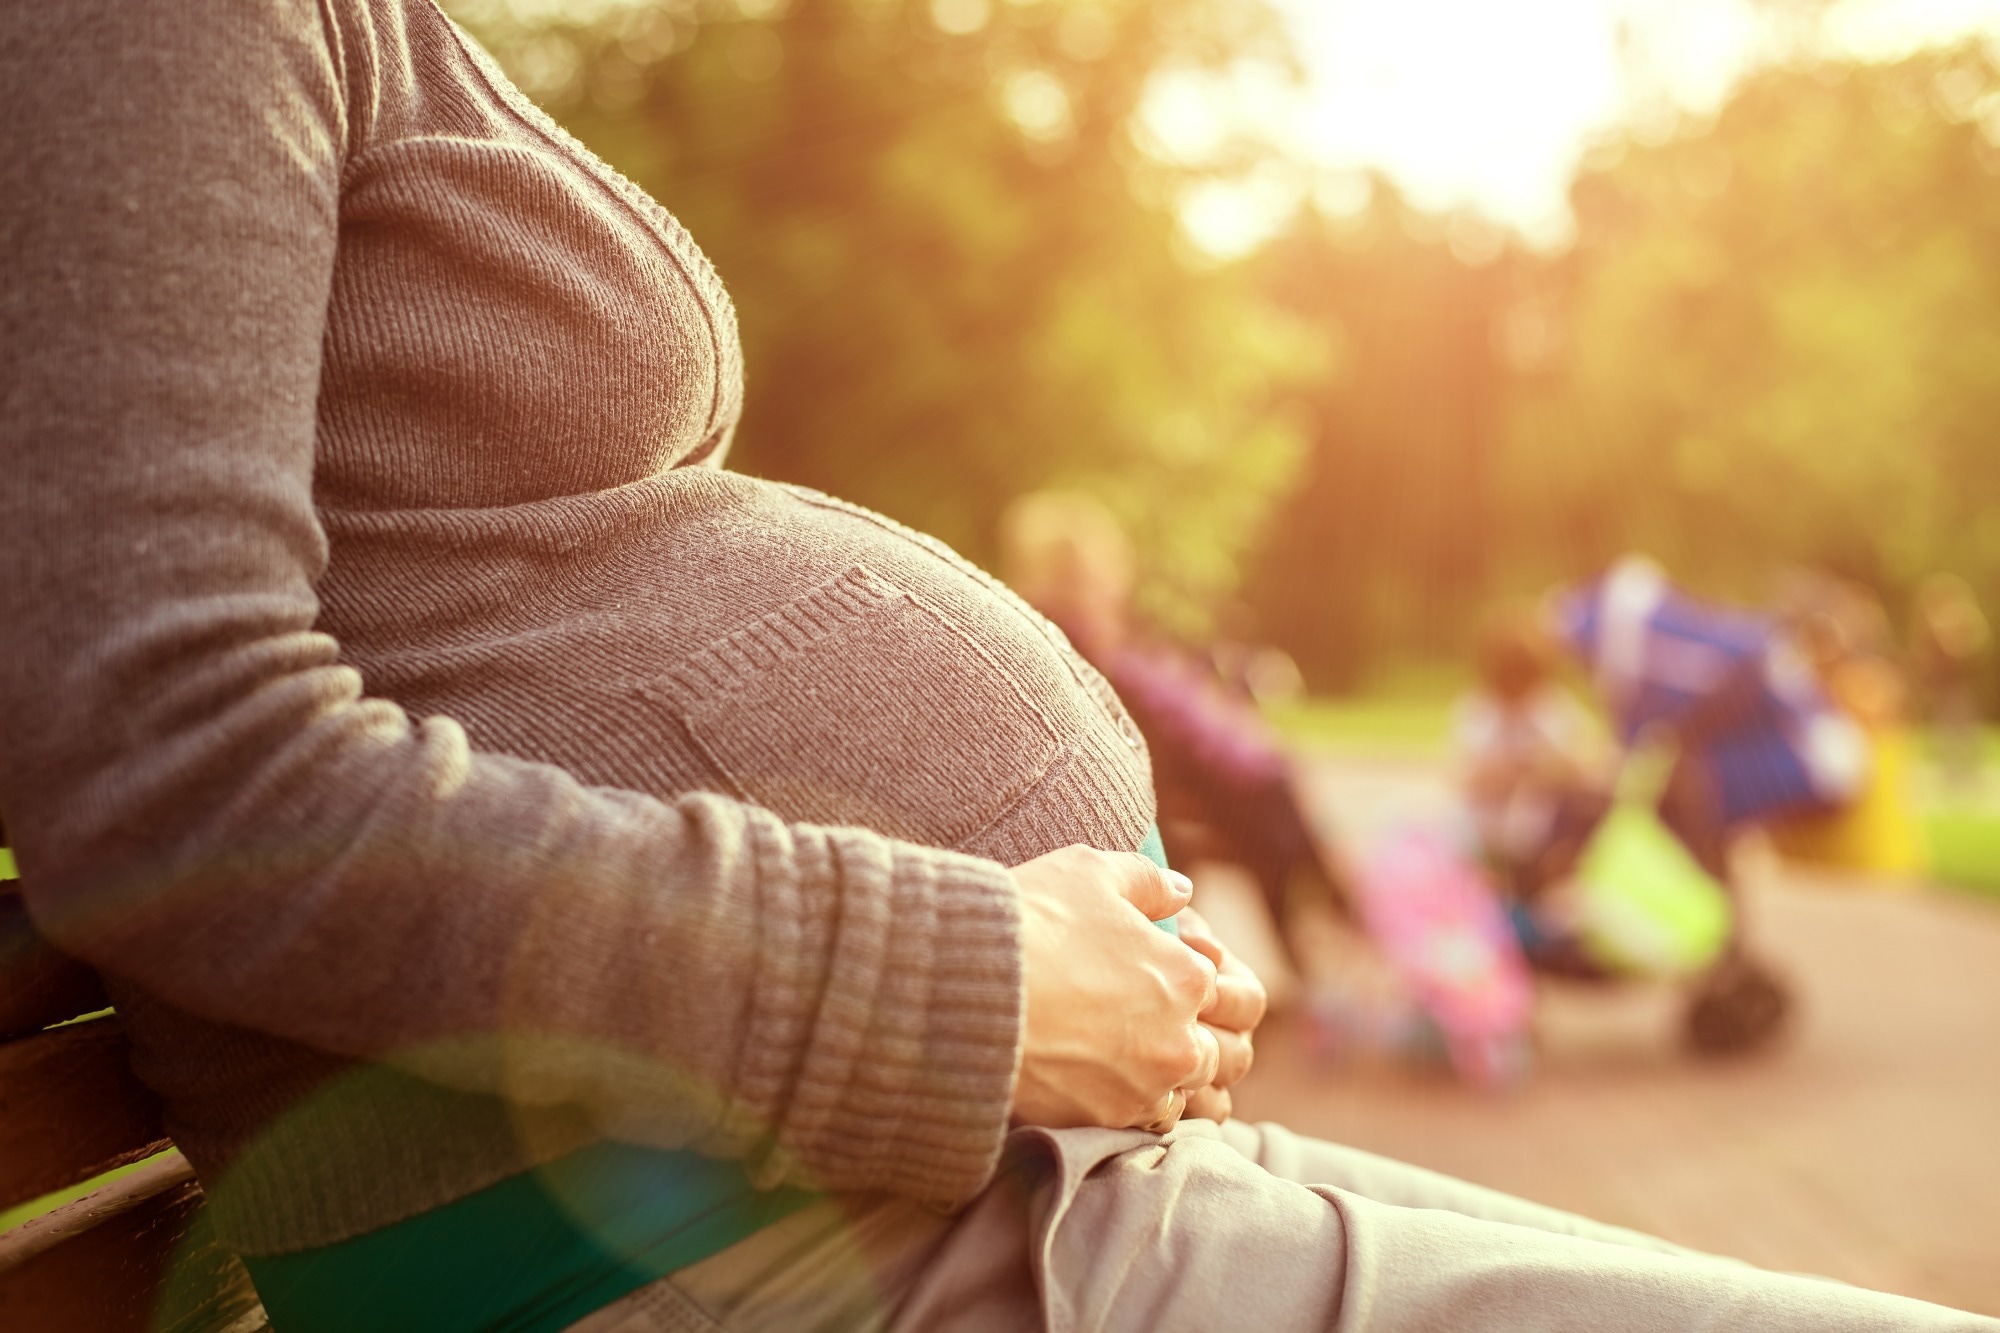 Study: COVID-19 Prevalence and Trends Among Pregnant and Postpartum Individuals in Maine by Rurality and Pregnancy Conditions. Image Credit: Coffeemill/Shutterstock.com